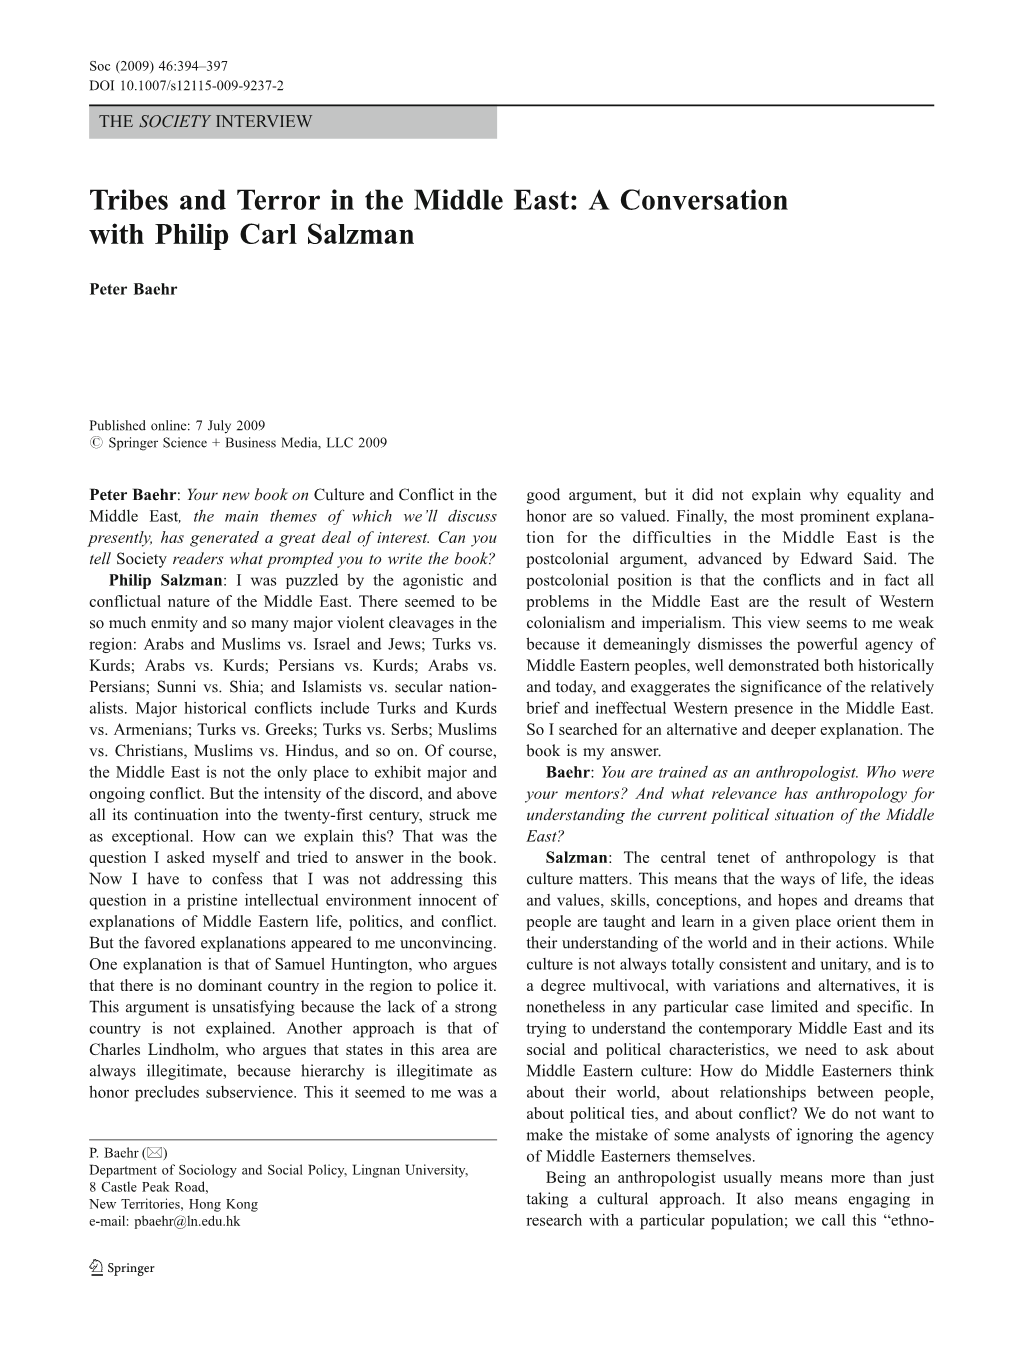 Tribes and Terror in the Middle East: a Conversation with Philip Carl Salzman